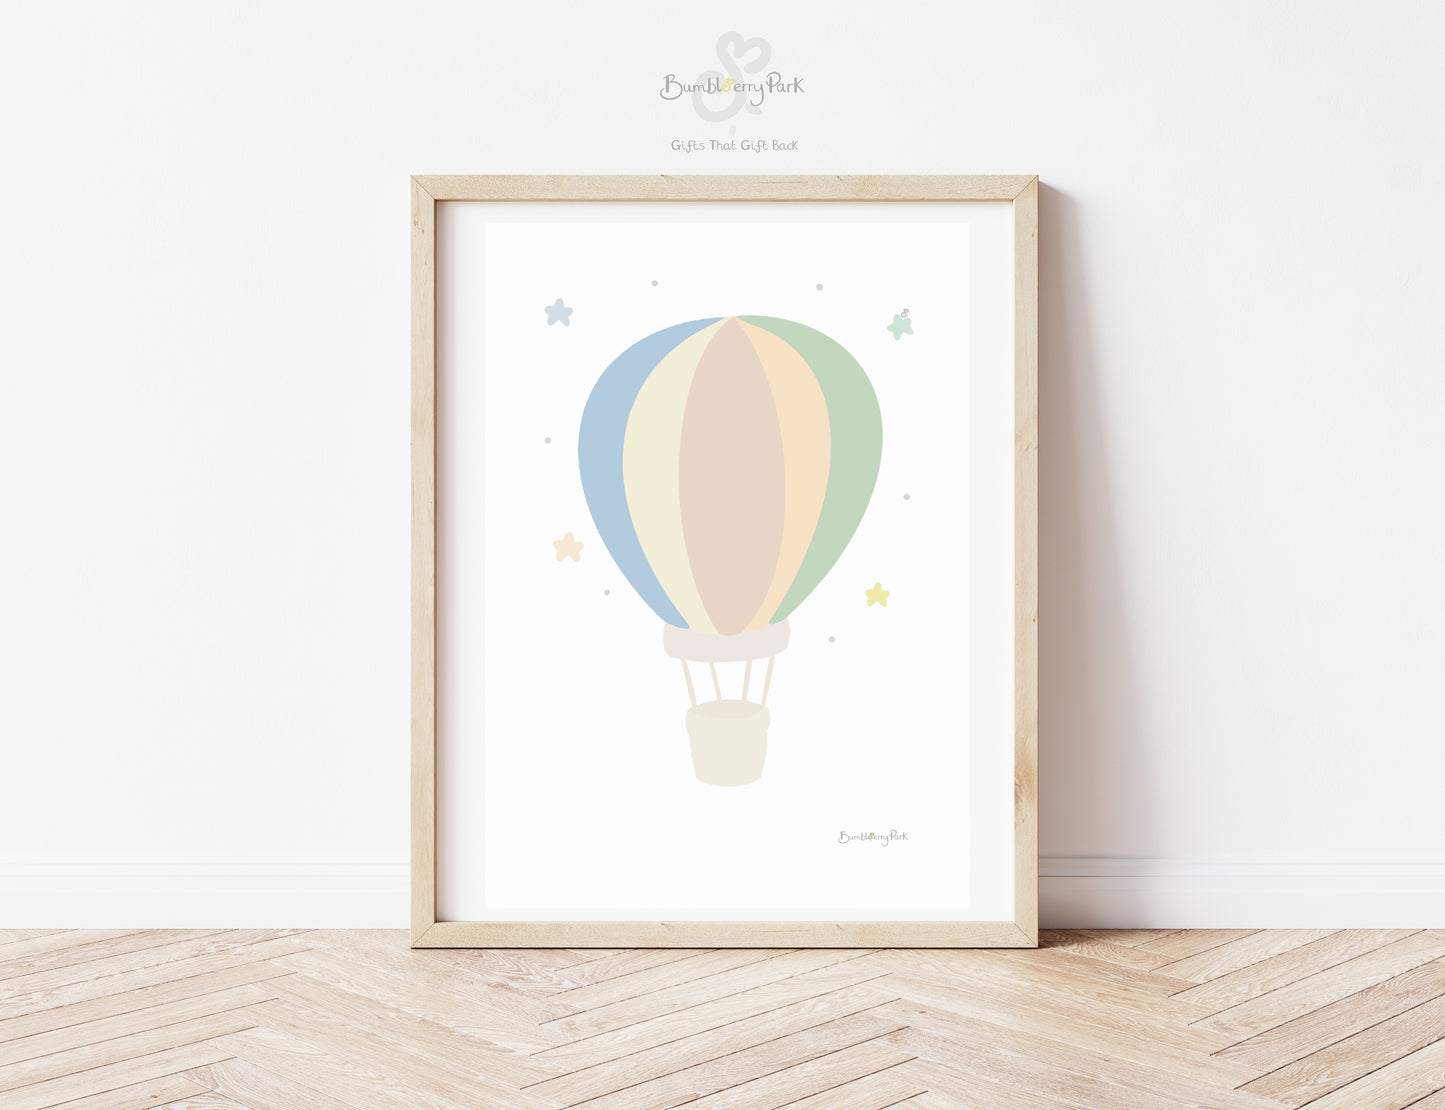 neutral boho chic little explorer nursery posters for children's bedroom. Neutral nursery decor prints with travel and transport theme decor with mountains, sunshine, hot air balloon design